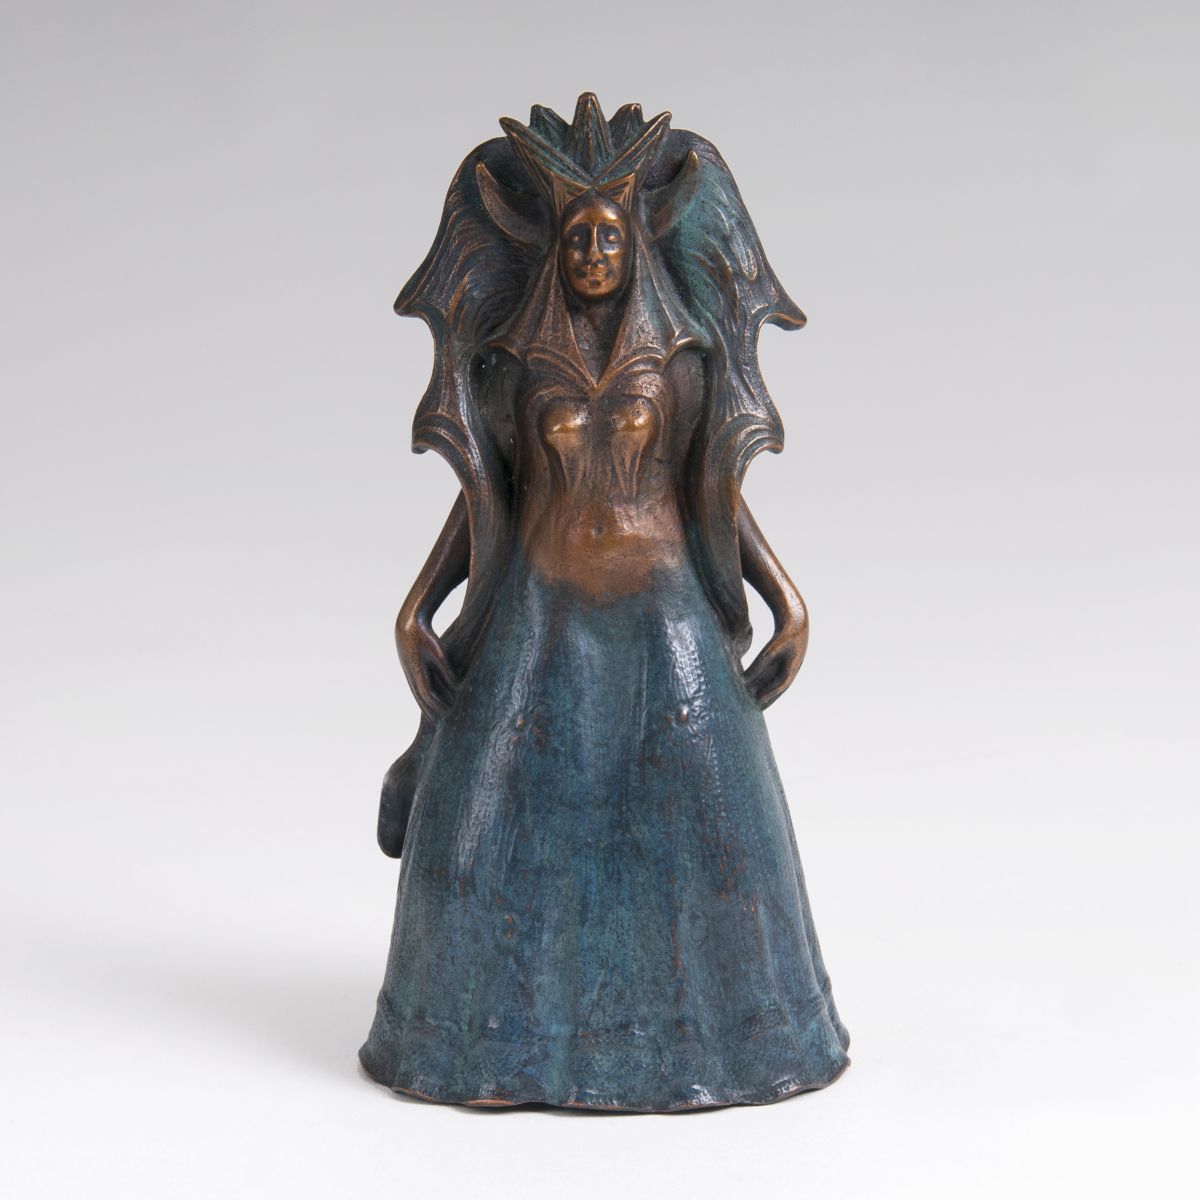 A Bronze Sculpture 'The Queen of the Night'